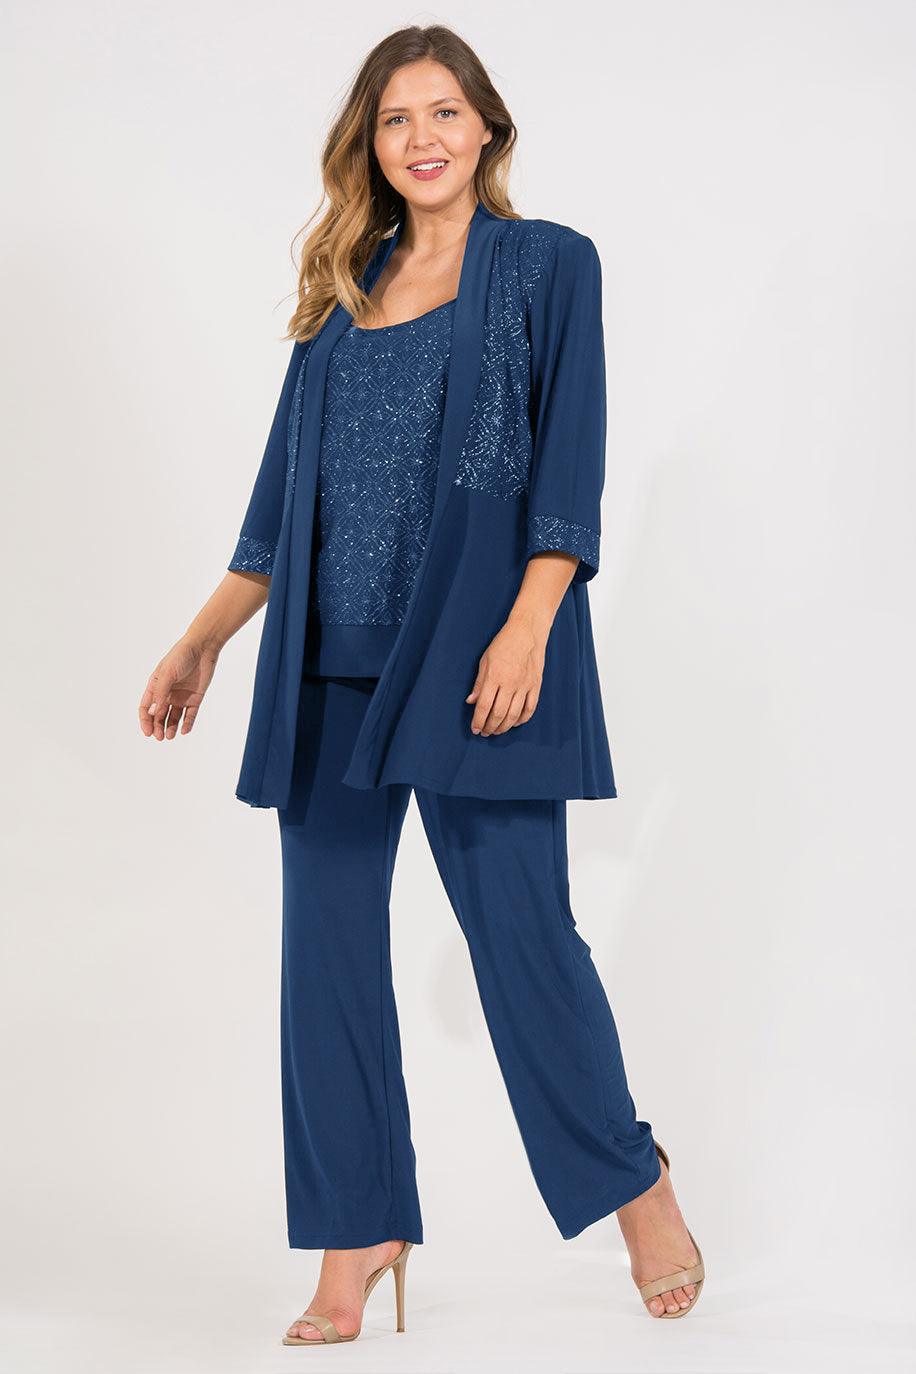 Ru0026M Richards 5589W Plus Size Mother Of The Bride Pant Suit for $39.99 – The  Dress Outlet